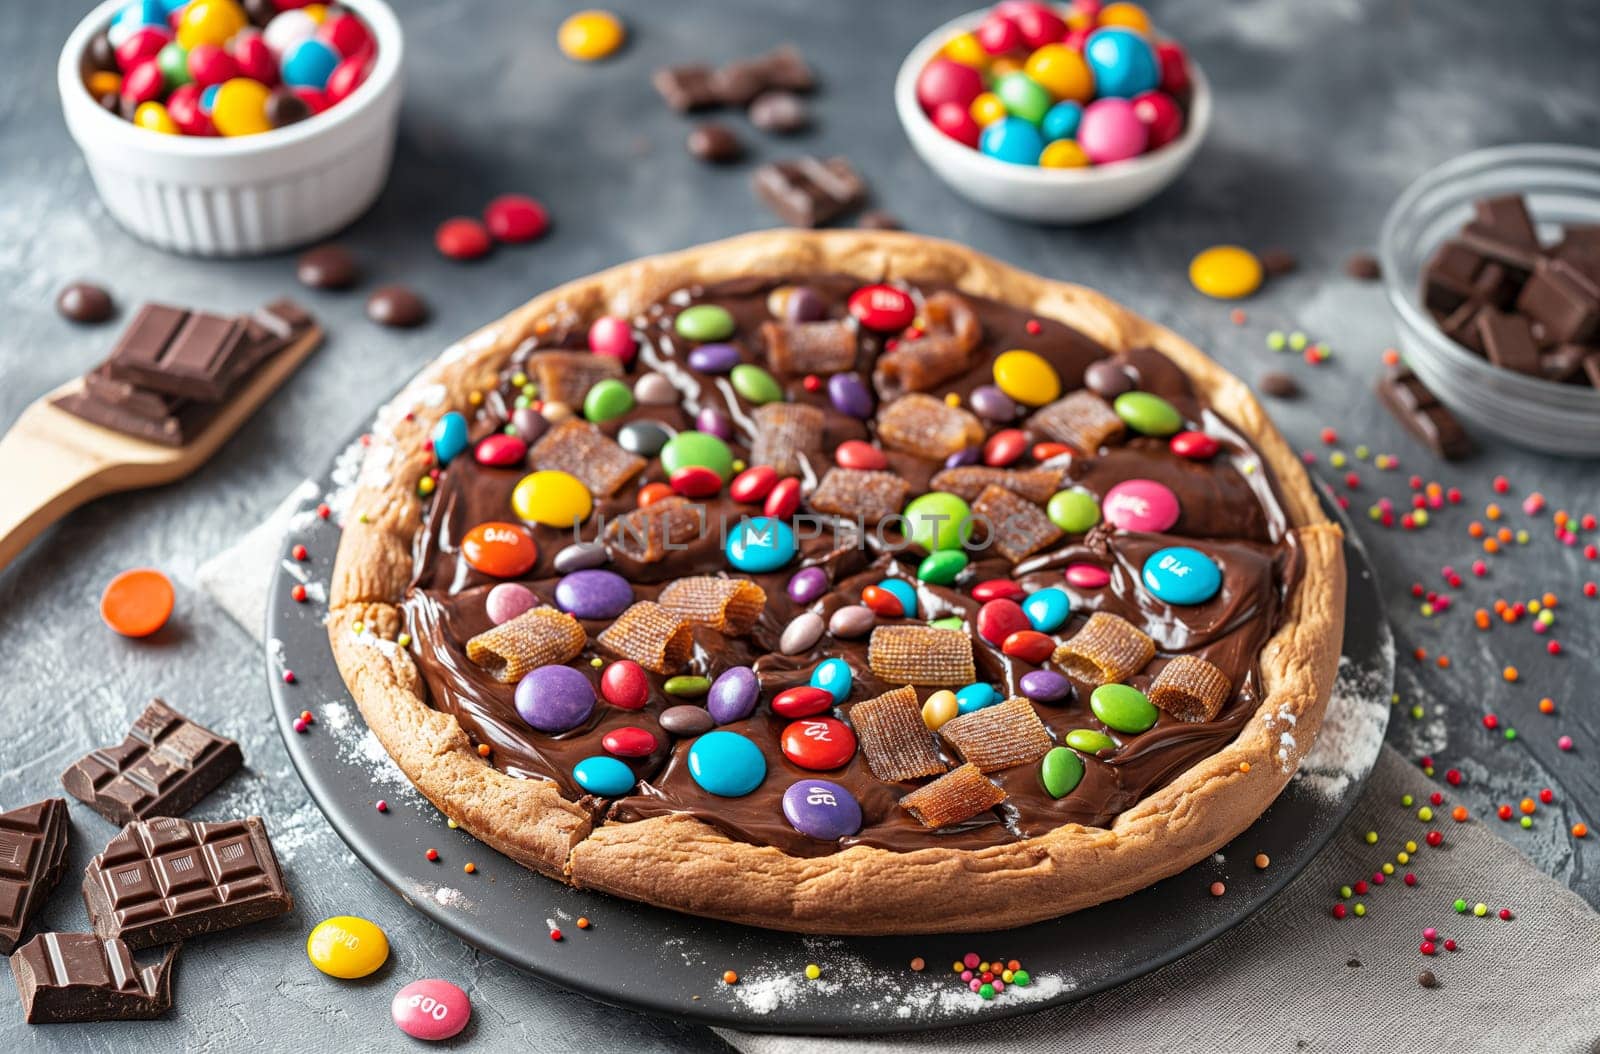 Chocolate candy cookie pizza by gcm